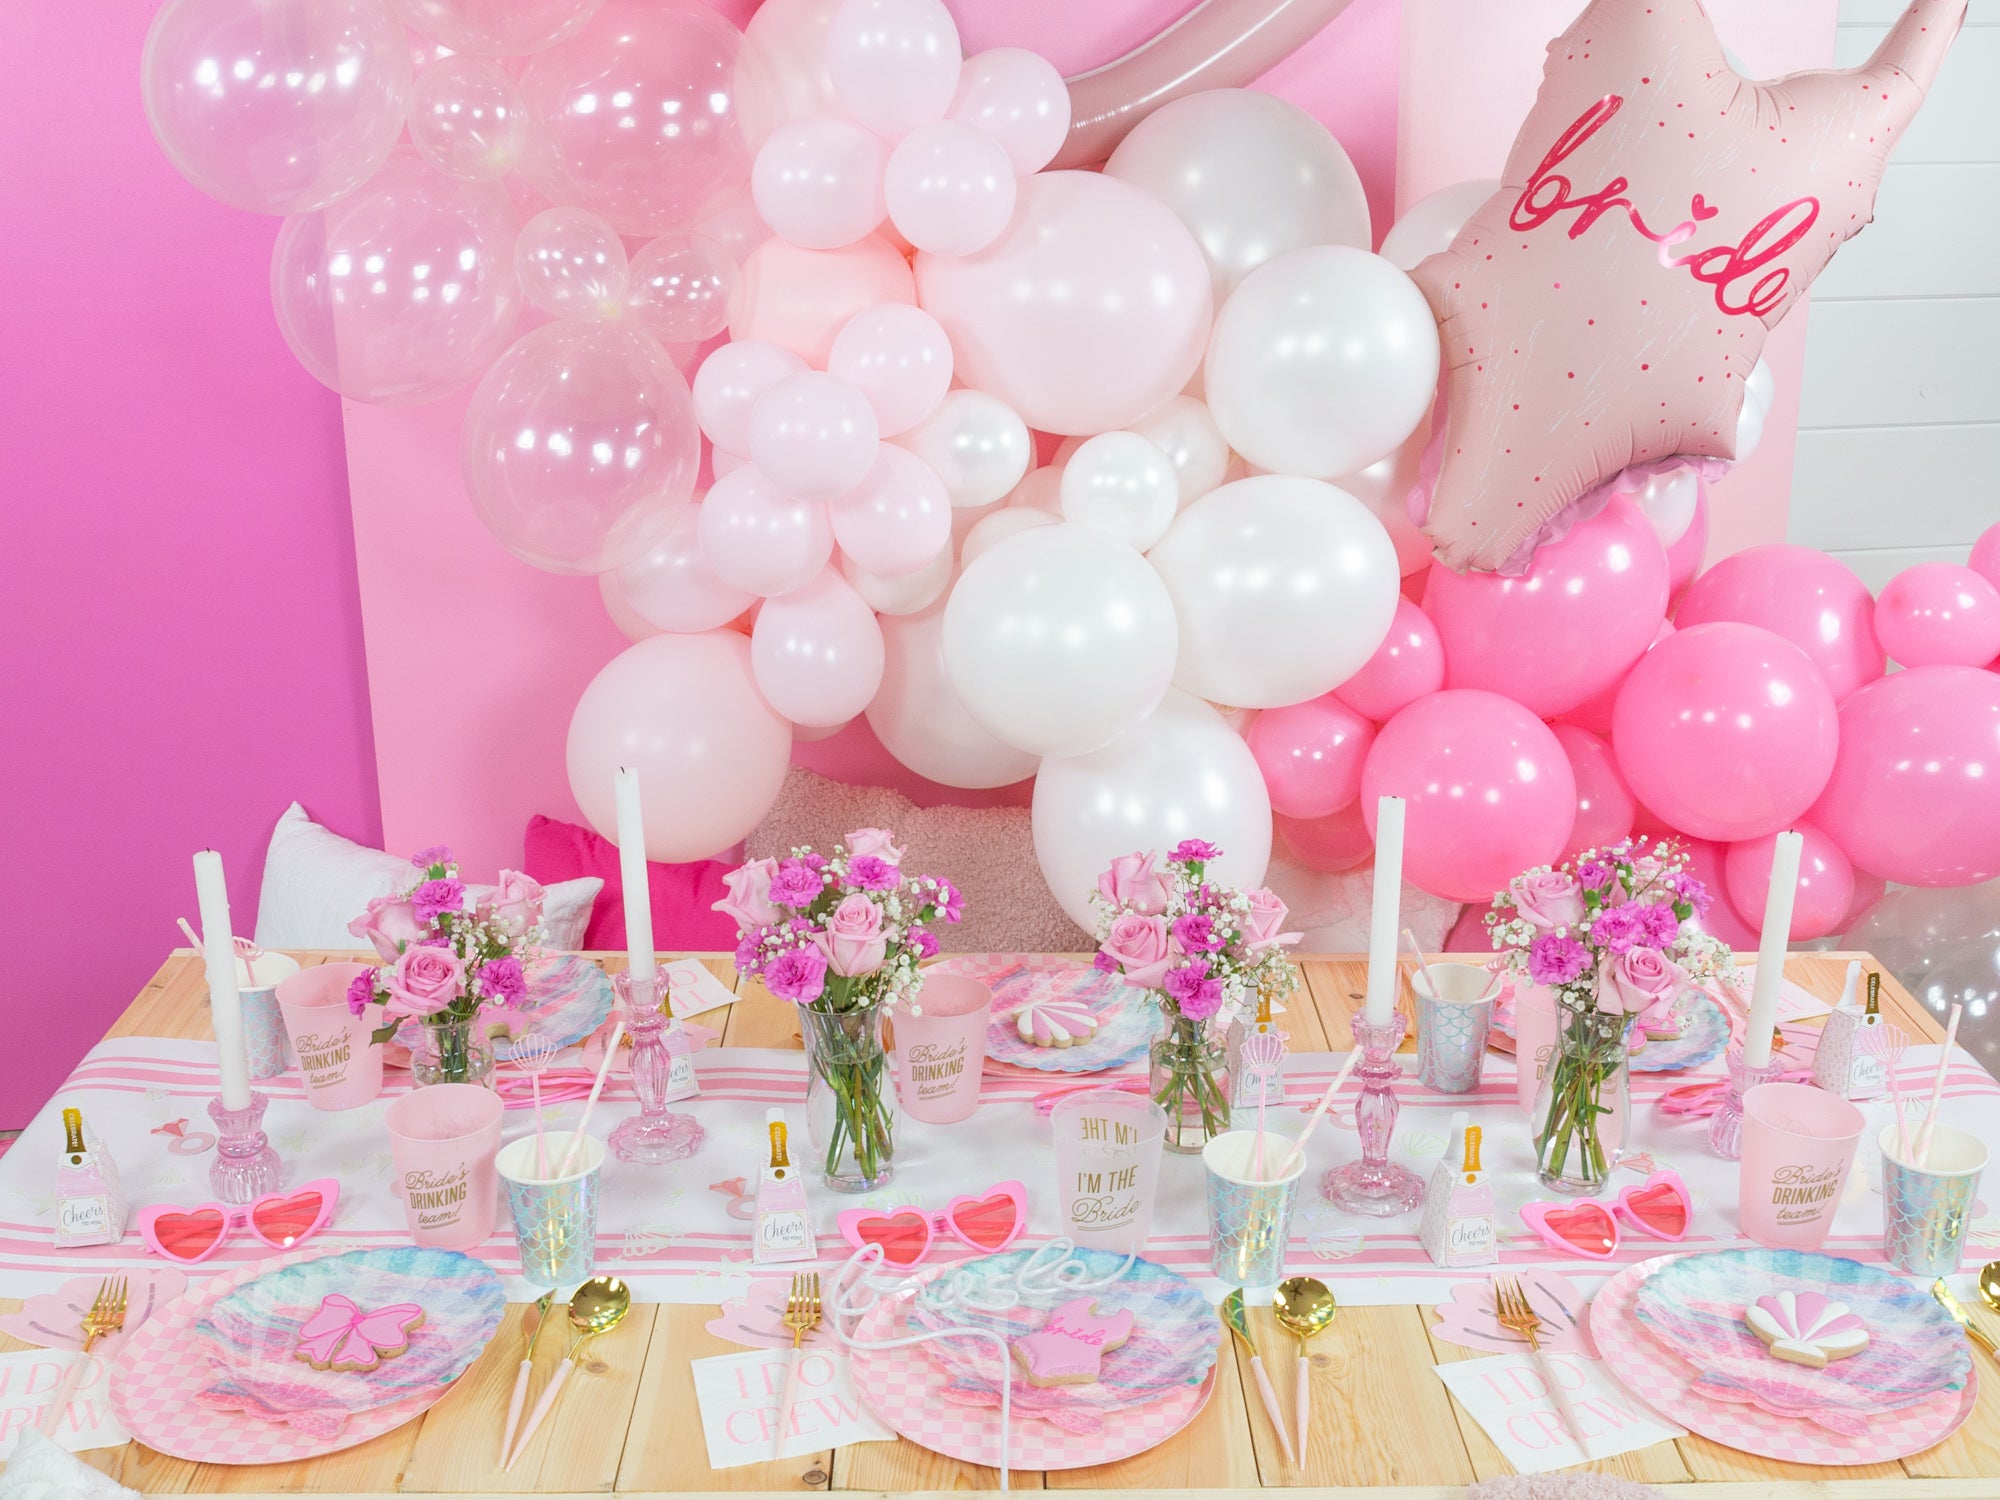 Bachelorette Pool Party Ideas to Shell-abrate the Bride's Last Splash | The Party Darling